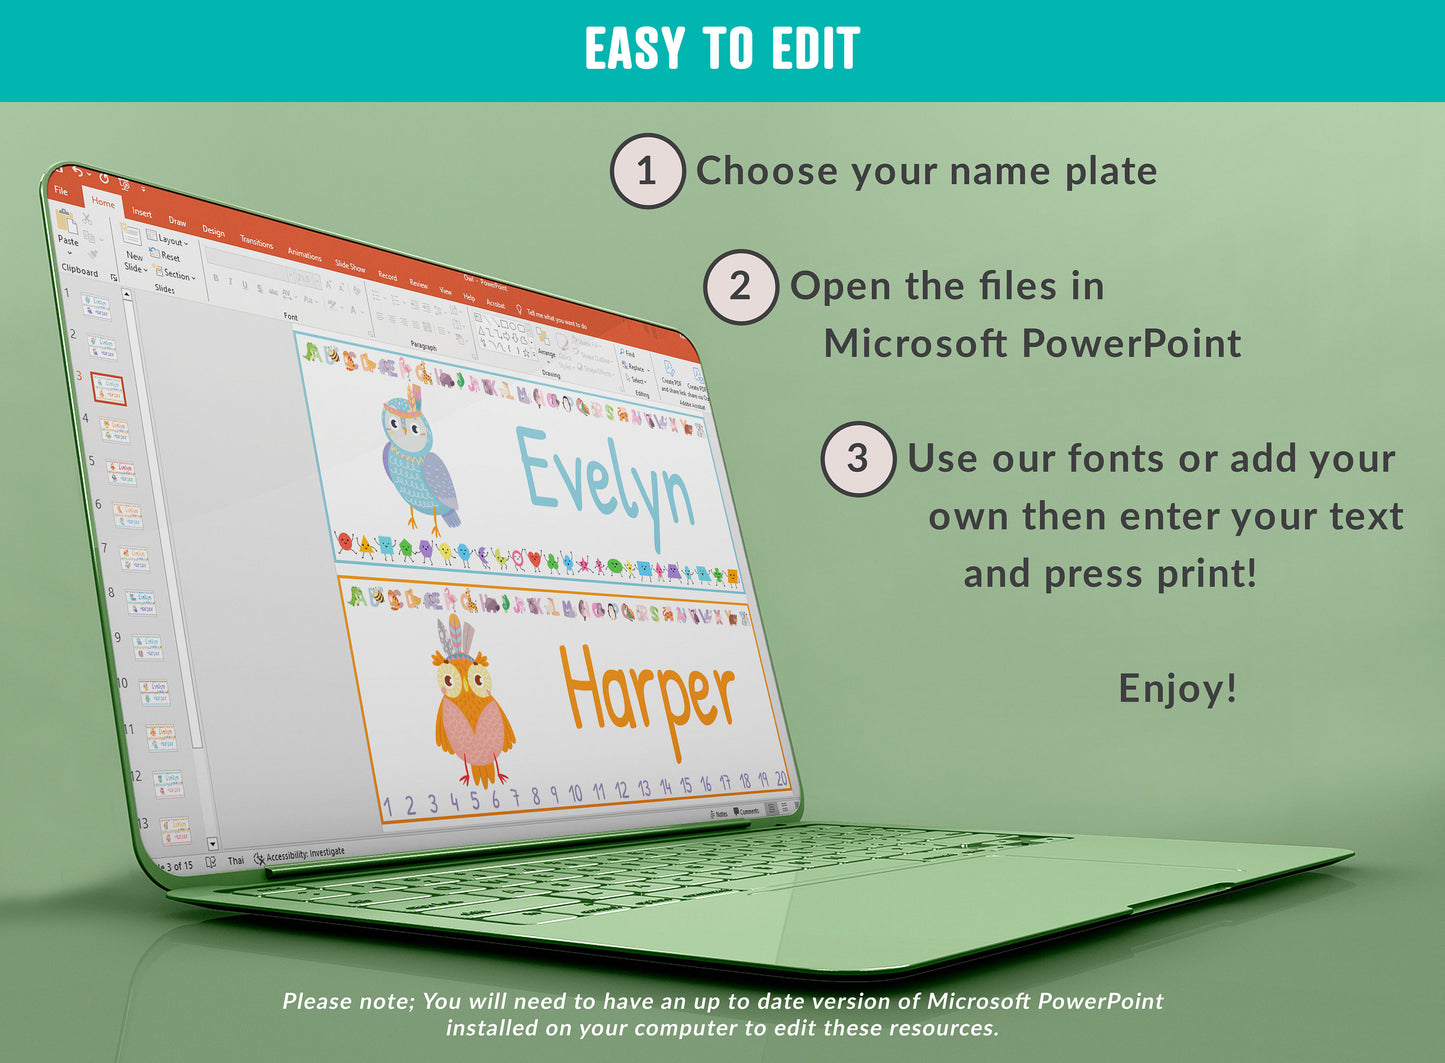 Cute Owl Student Desk Plates: 30 Editable Designs with PowerPoint, US Letter Size, Instant Download